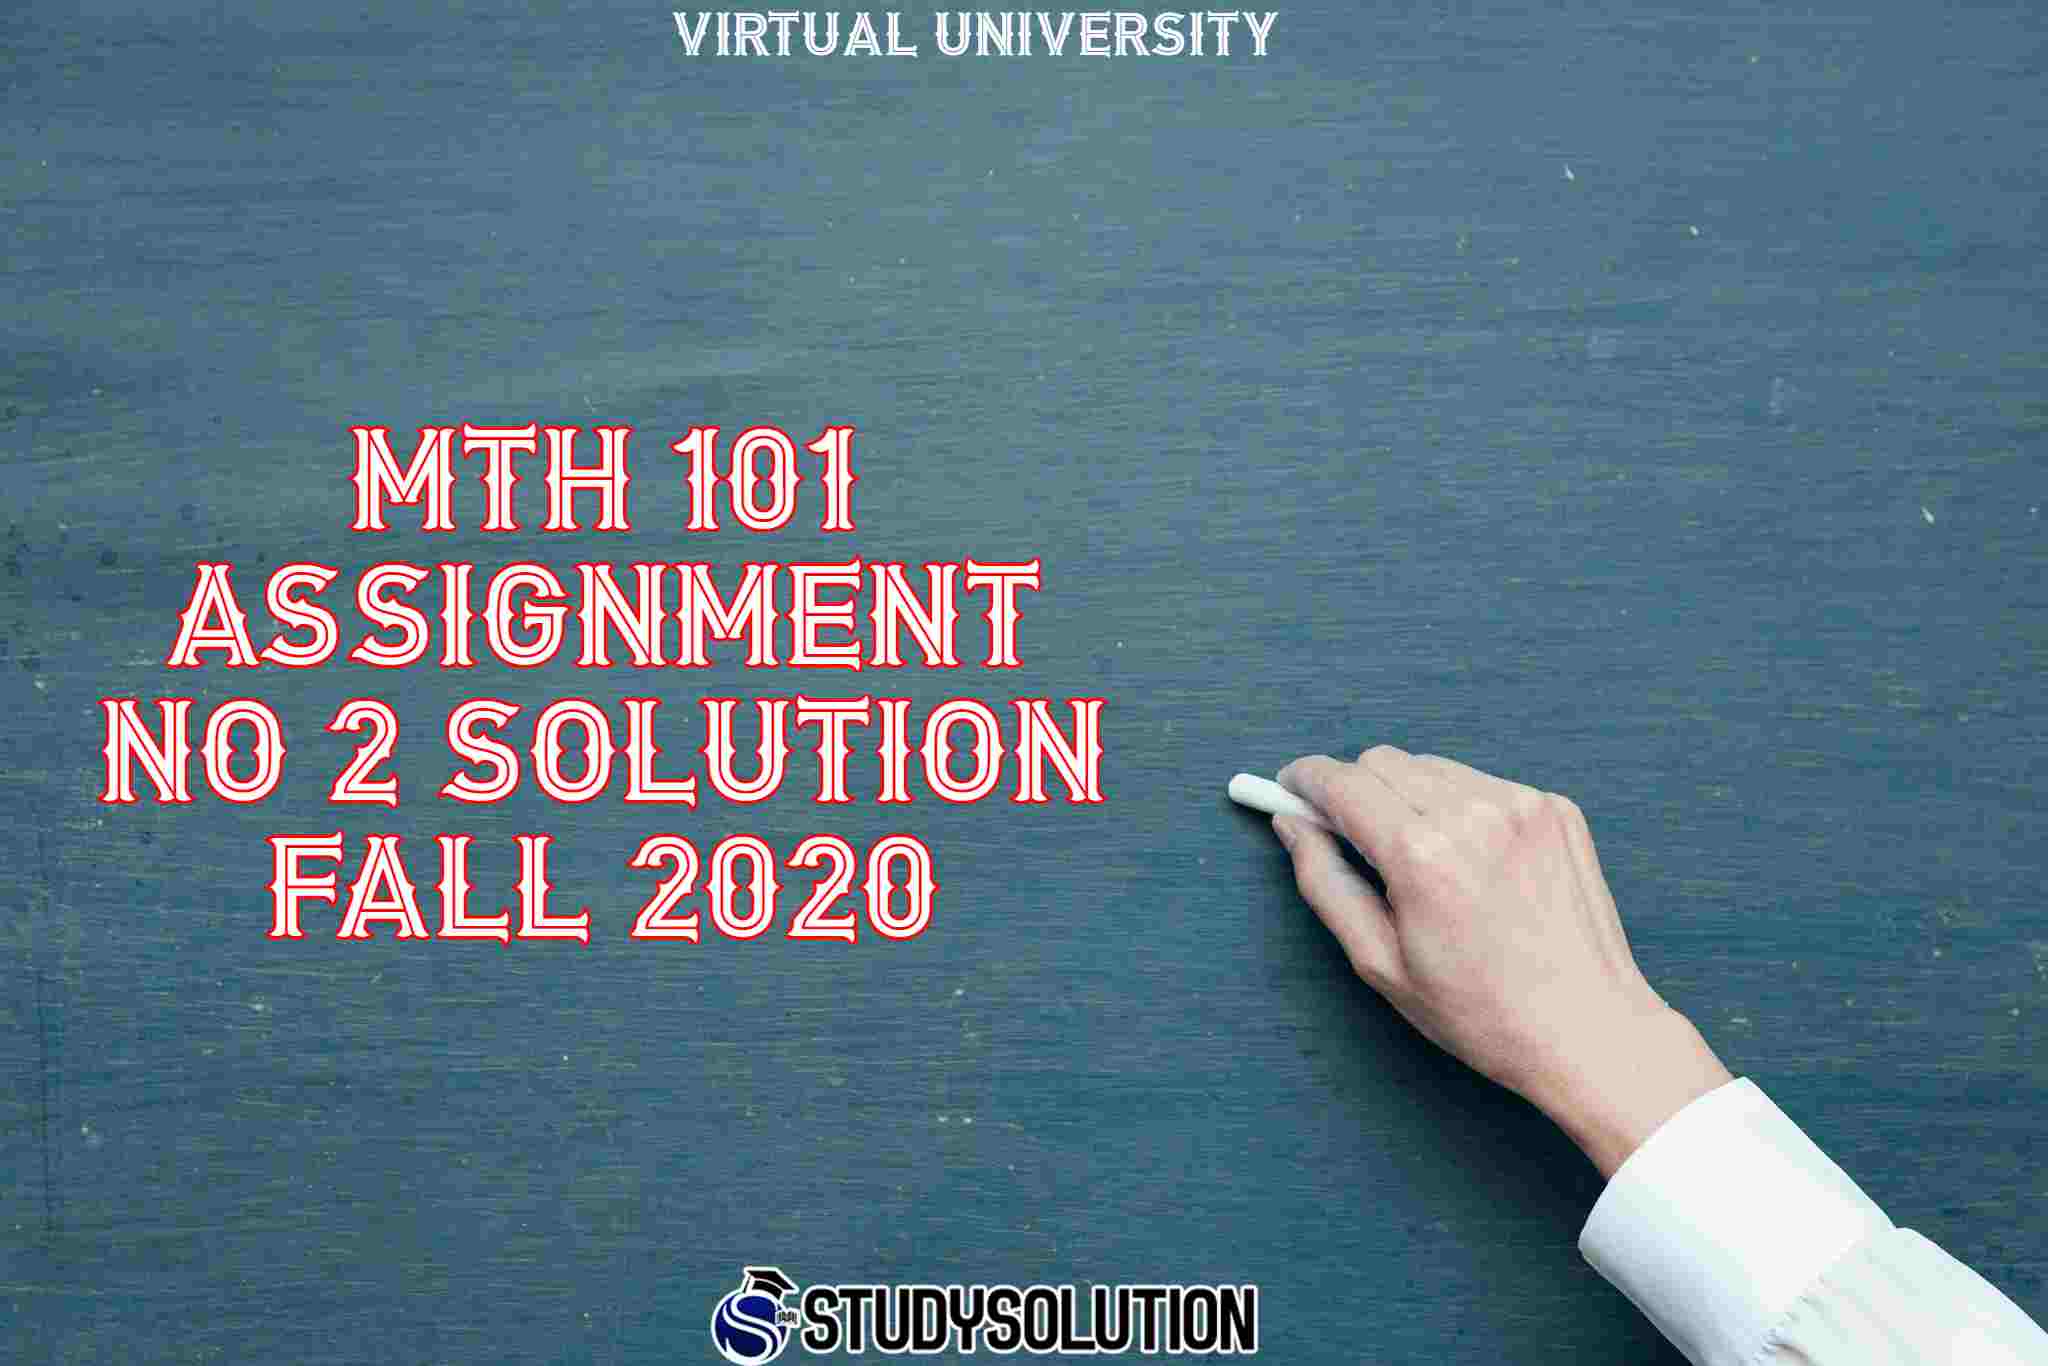 MTH 101 Assignment No 2 Solution Fall 2020